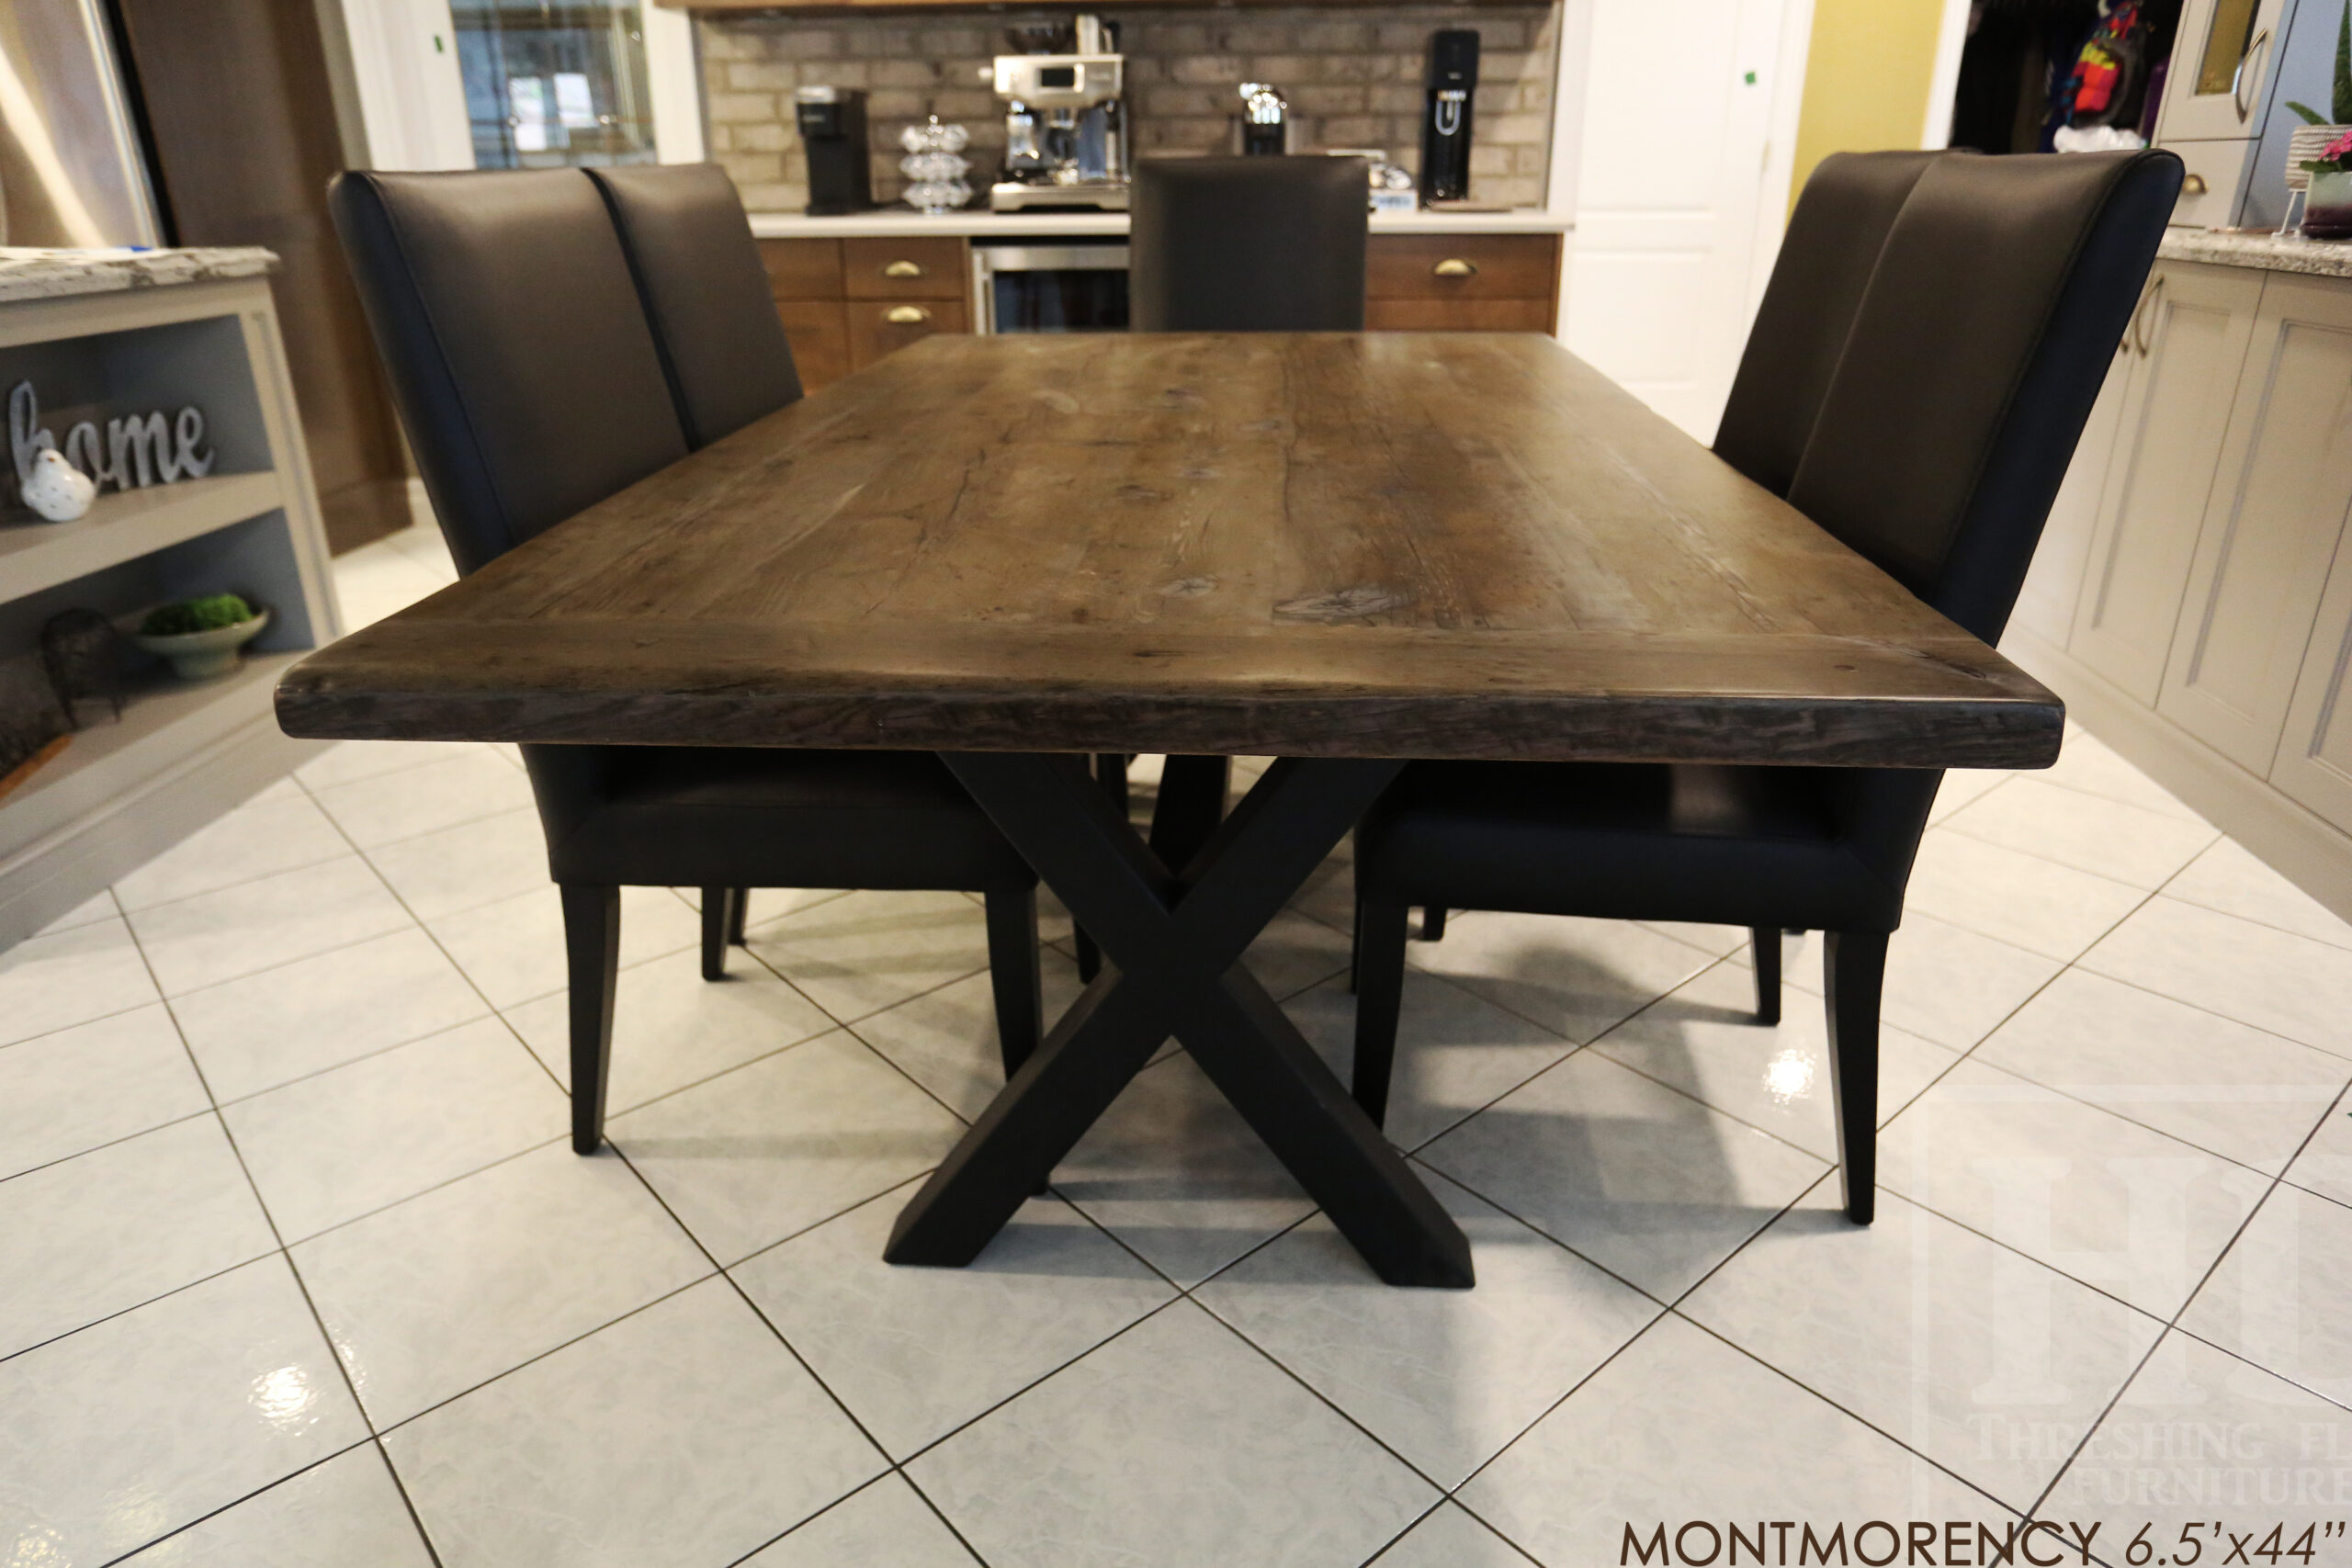 Project Summary: 6.5’ Reclaimed Ontario Barnwood Table we made for a Hamilton, Ontario home – 44” wide –X Shaped Matte Black Base - Old Growth Hemlock Threshing Floor Construction - Original edges & distressing maintained – Bread Edge Boards – Barnboard Grey Option - Premium epoxy + satin polyurethane finish – 8 V Back Topgrain Leather Parsons Chairs / Black - www.table.ca